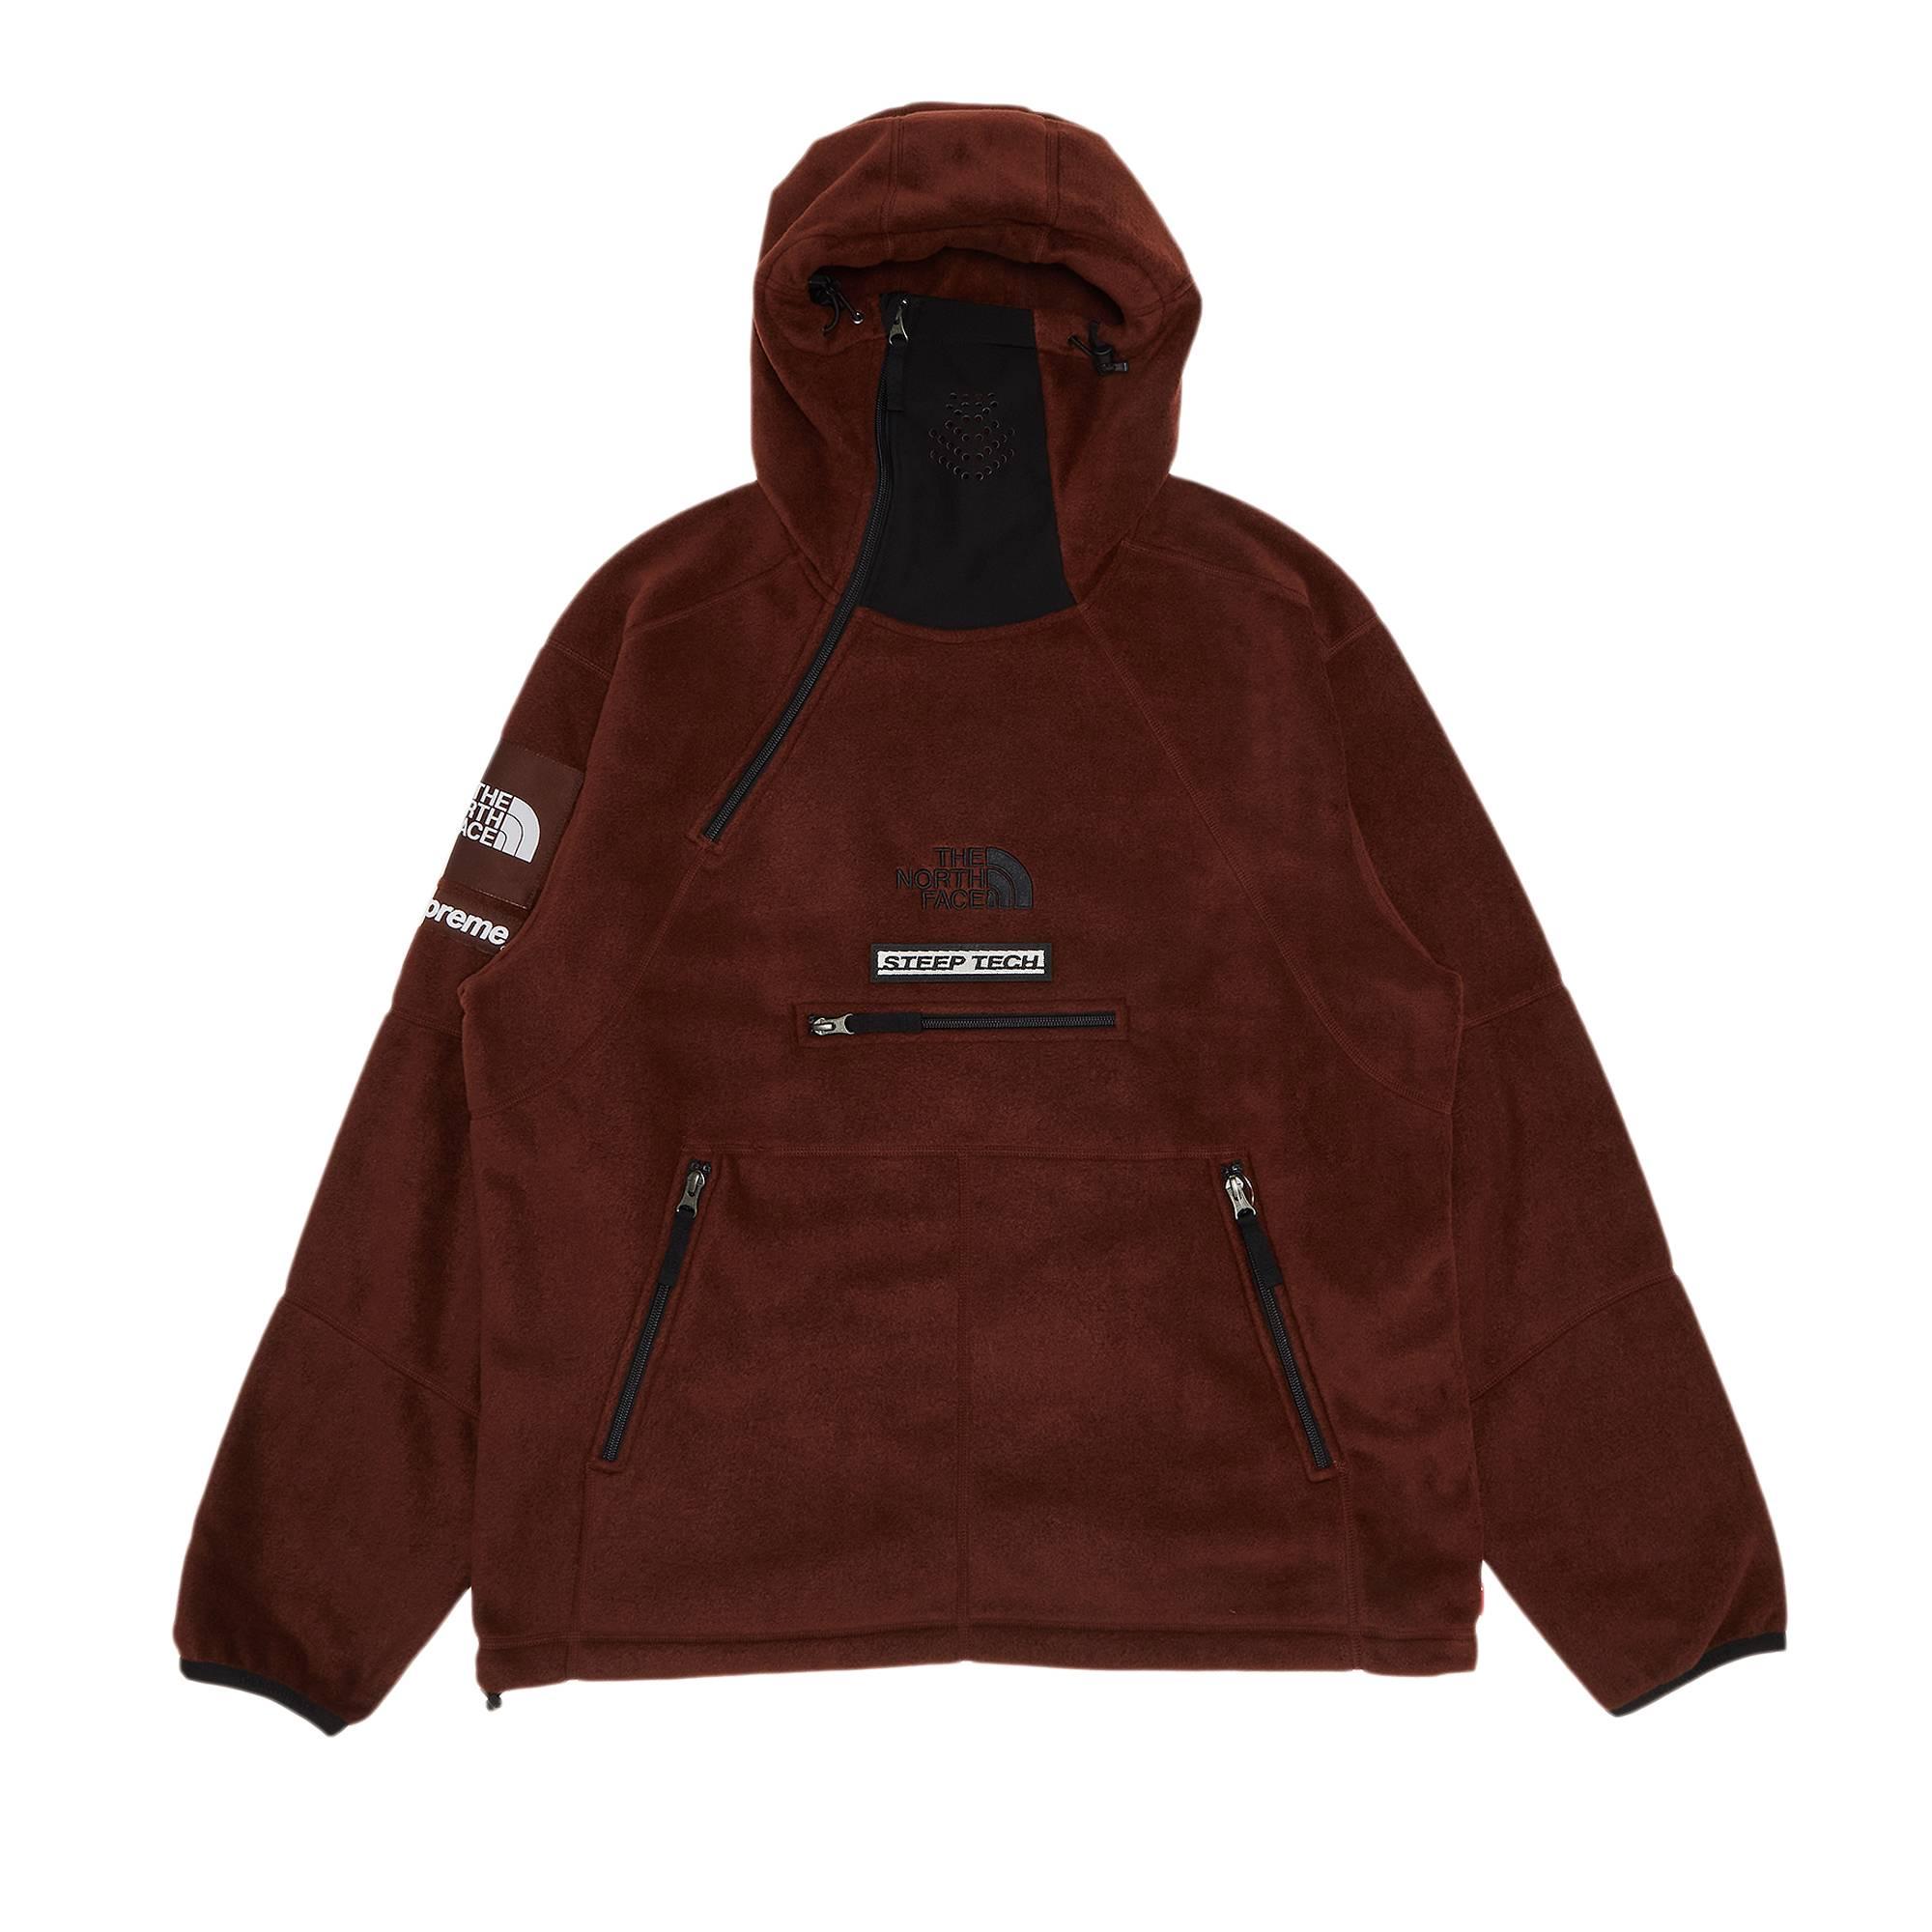 Supreme X The North Face Steep Tech Fleece Pullover 'brown' for